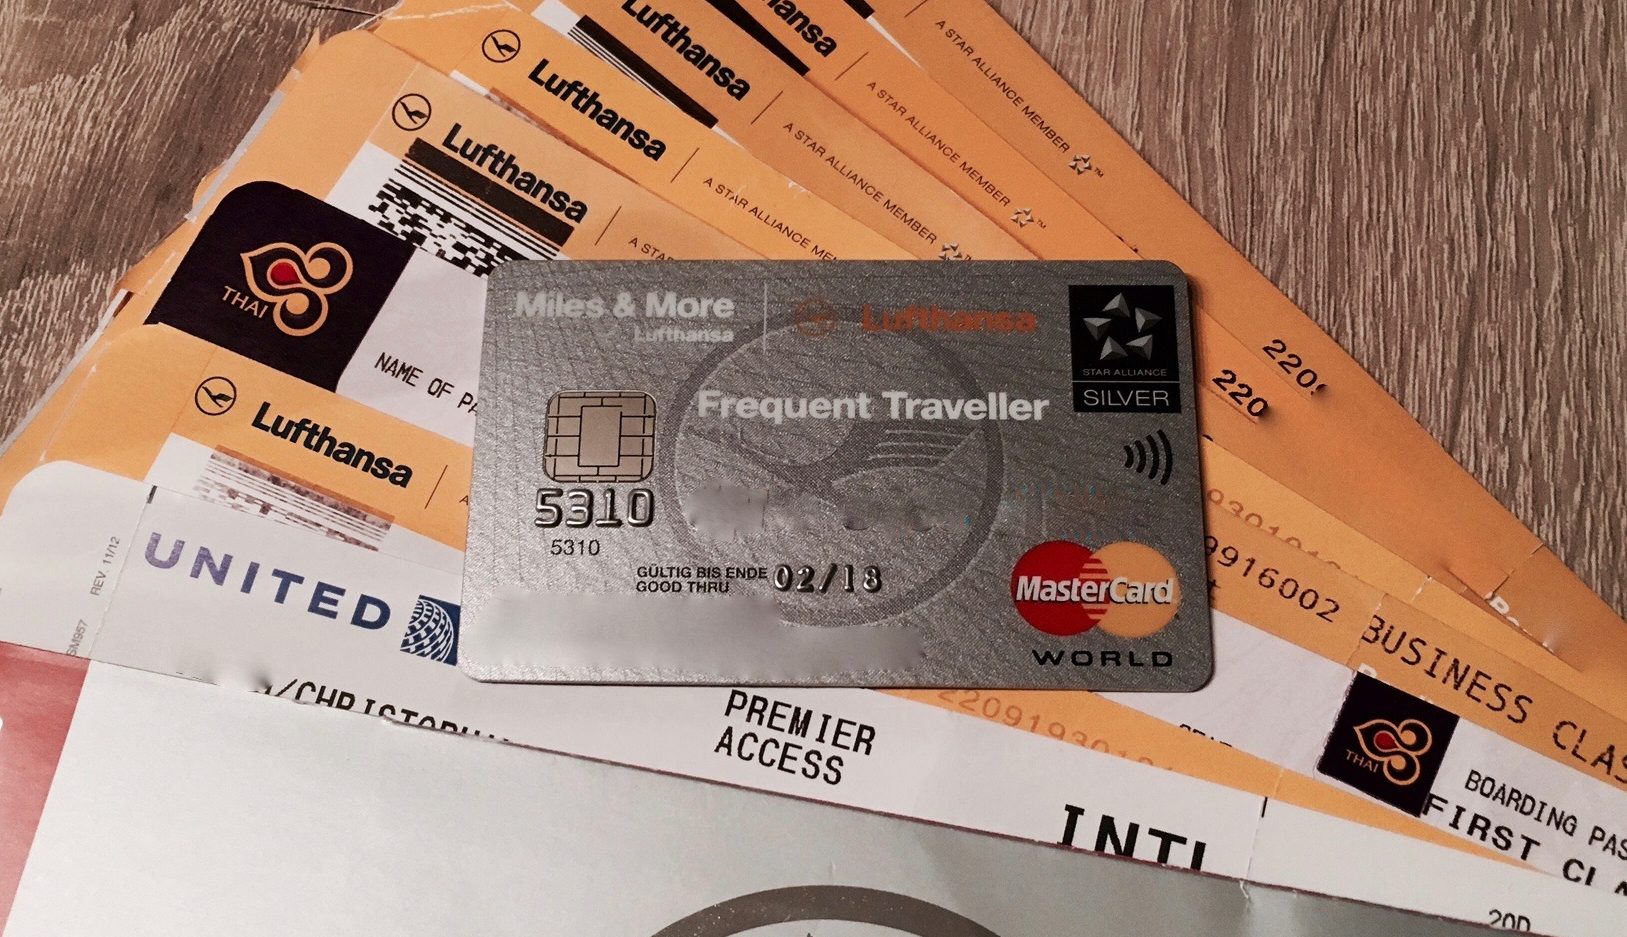 tgv frequent traveller card